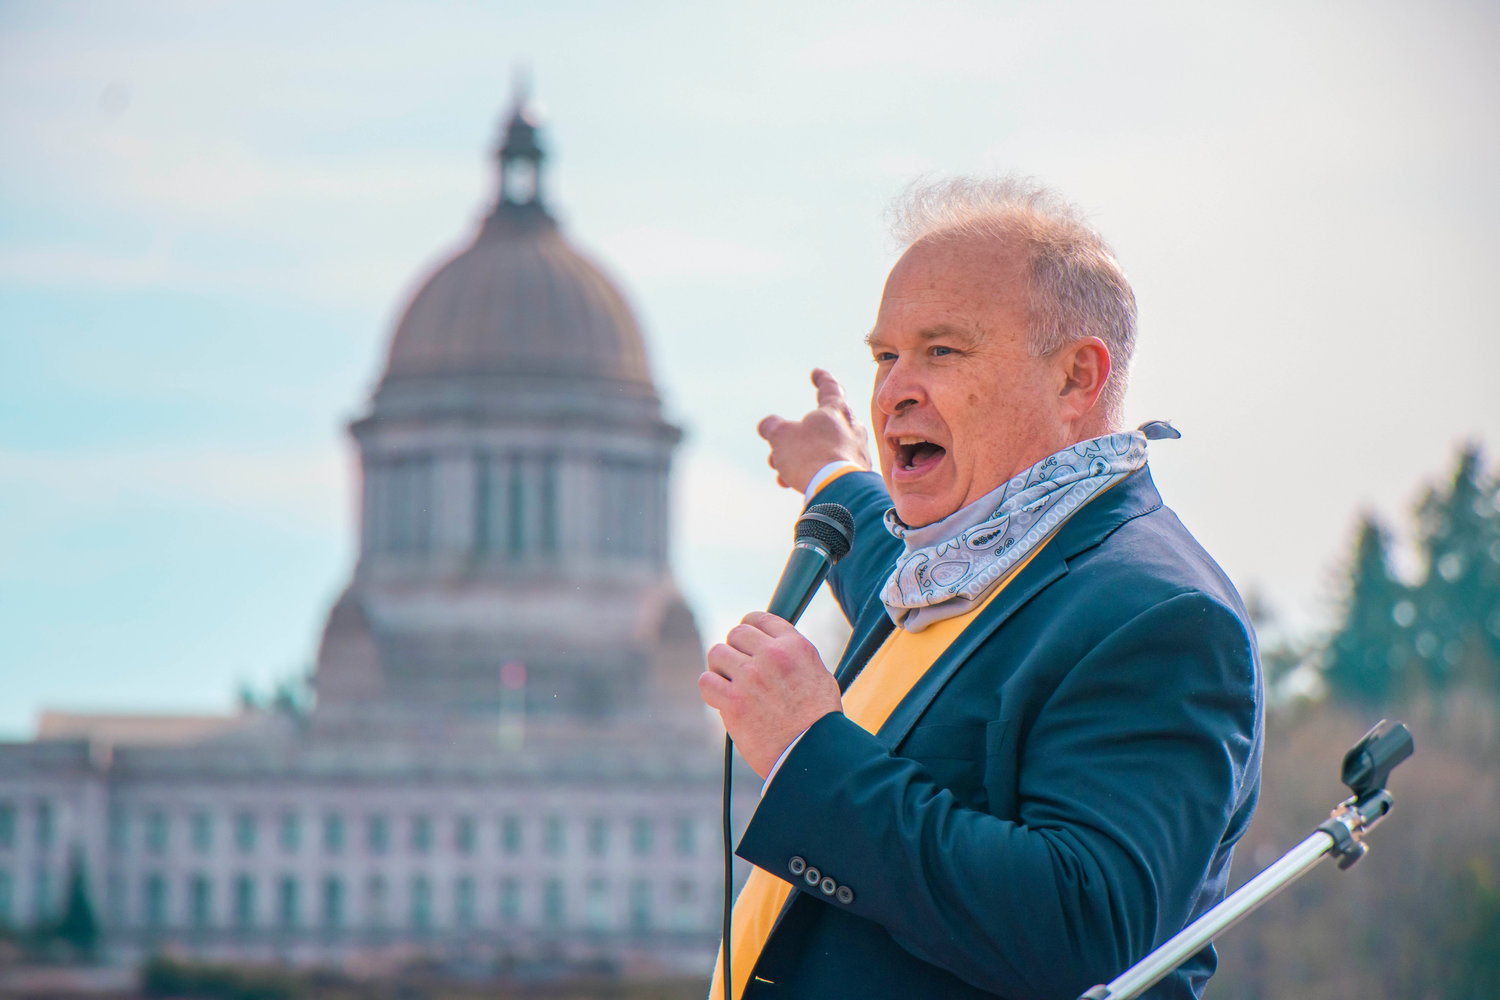 State Rep. Jim Walsh points to the Washington State Capitol during a rally in support of bringing back in-person schooling near Capitol Lake on Saturday in Olympia.